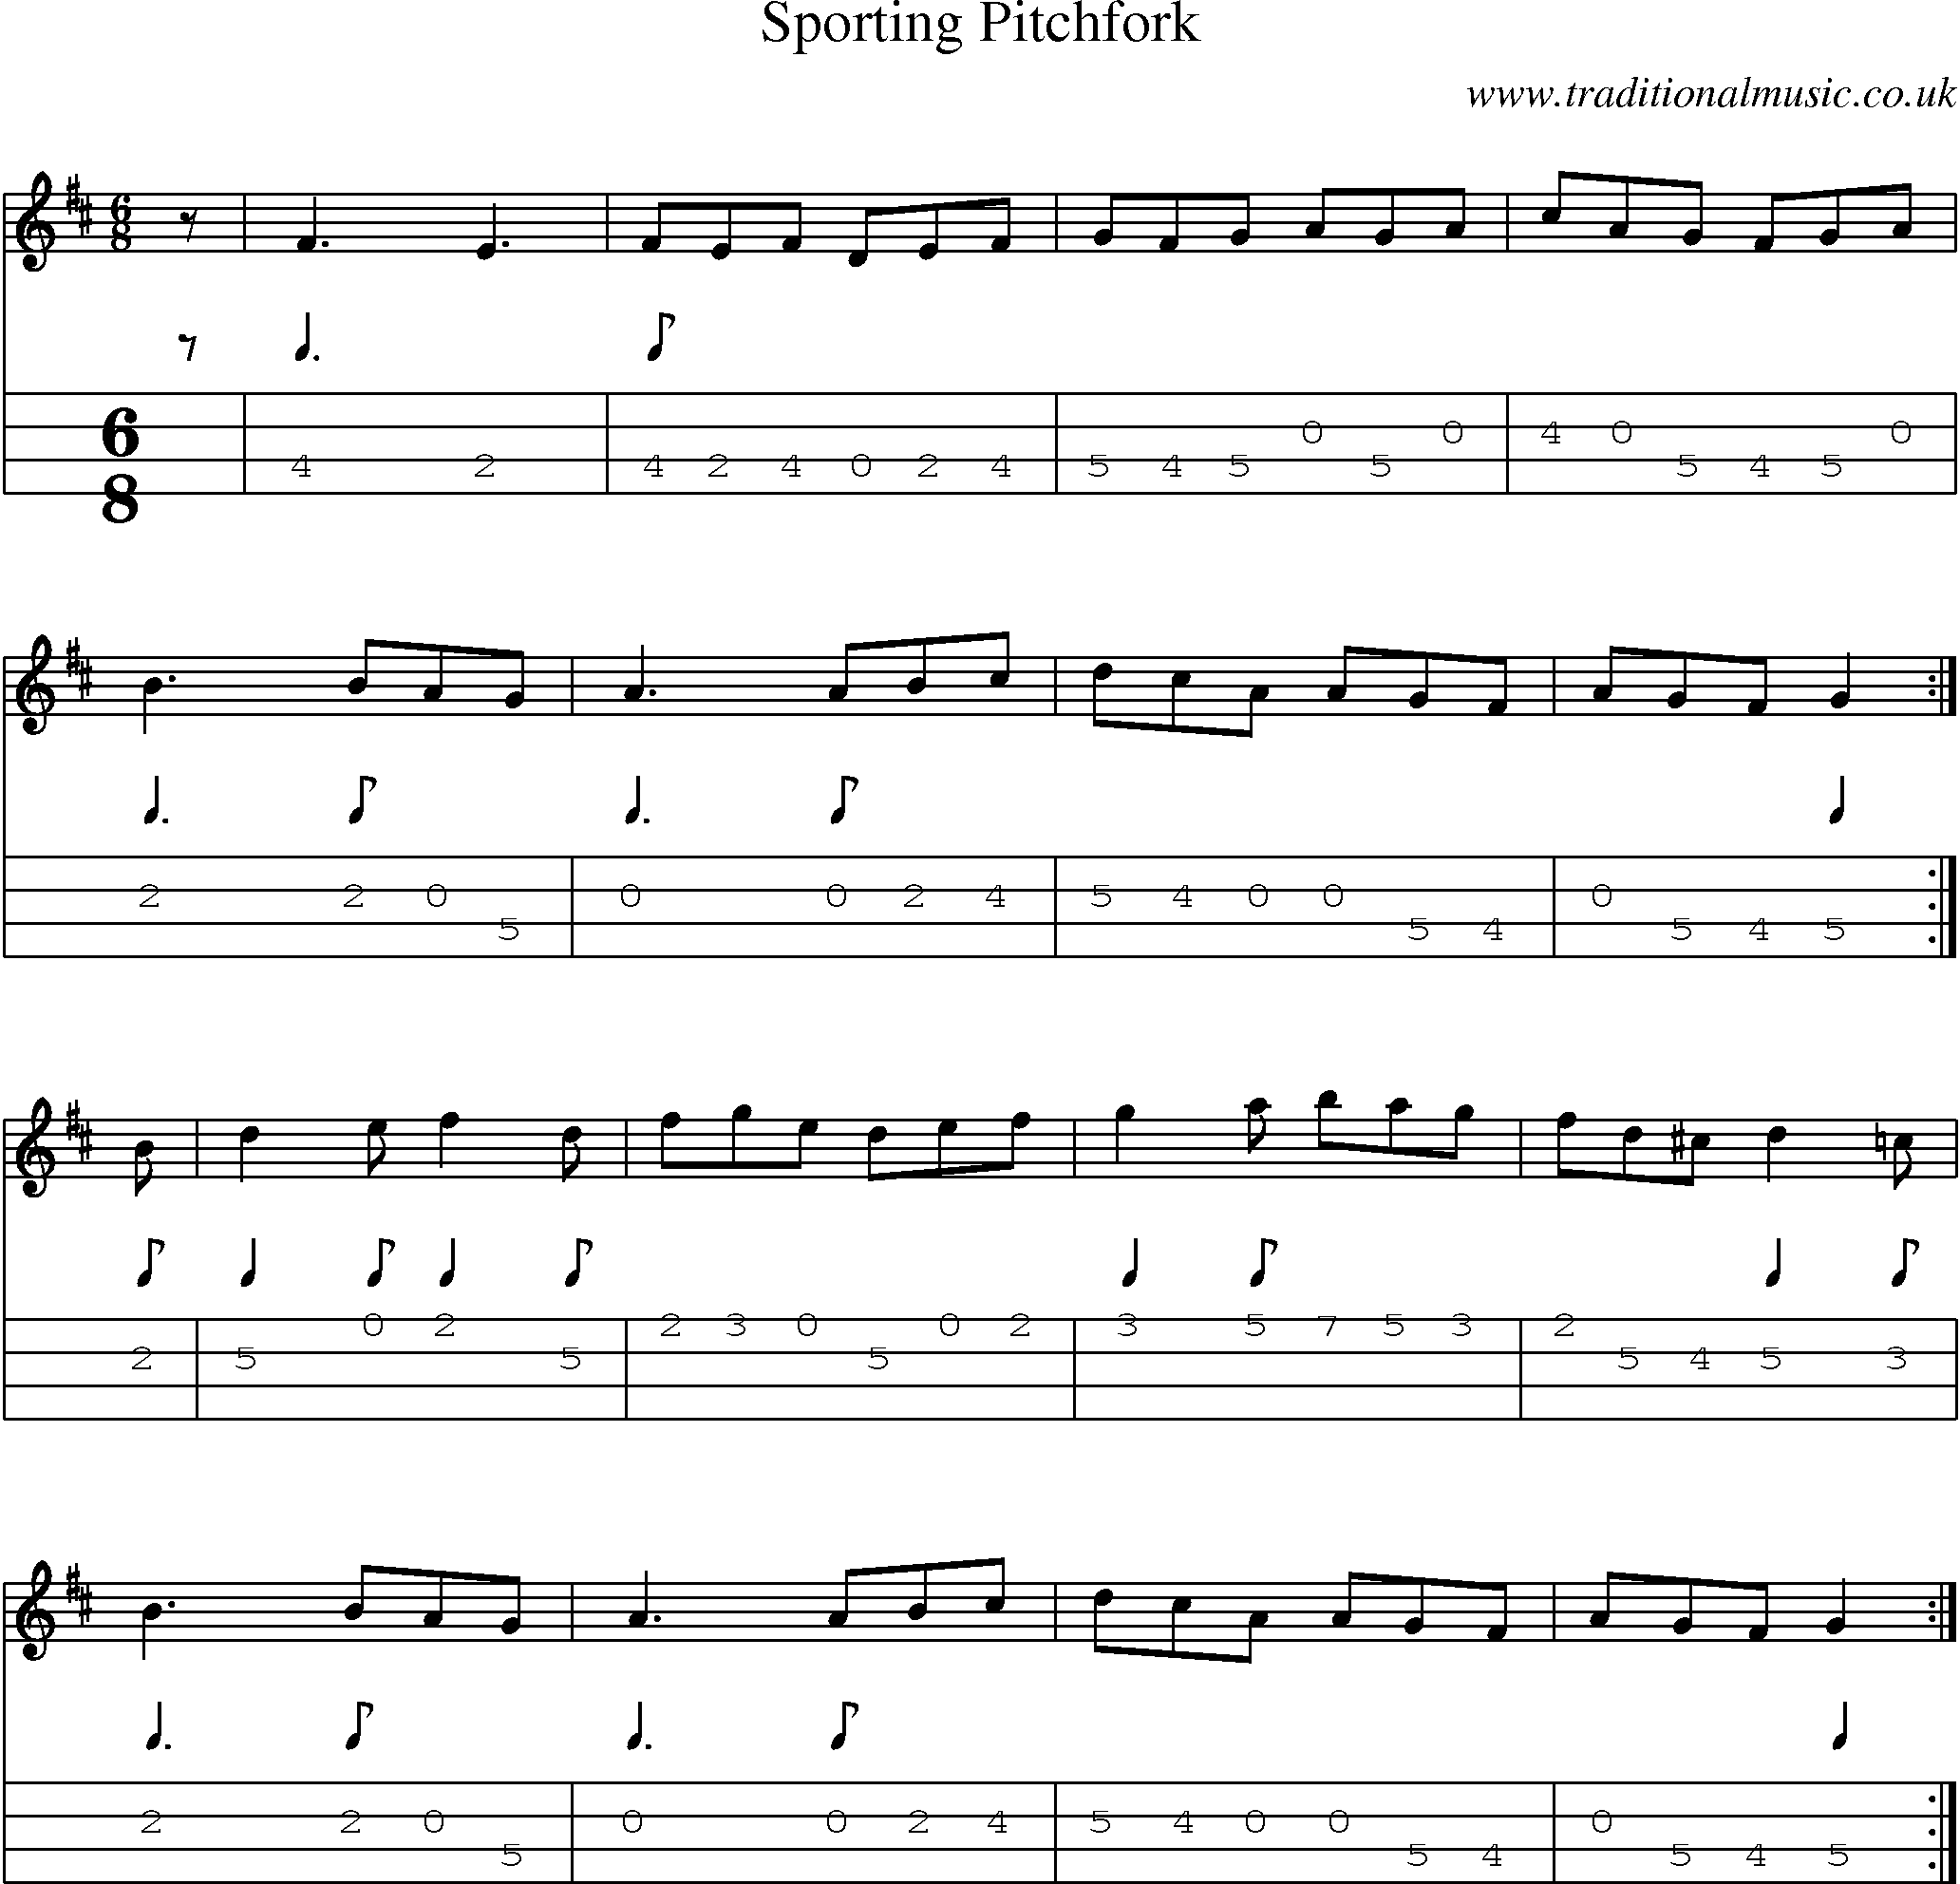 Music Score and Mandolin Tabs for Sporting Pitchfork